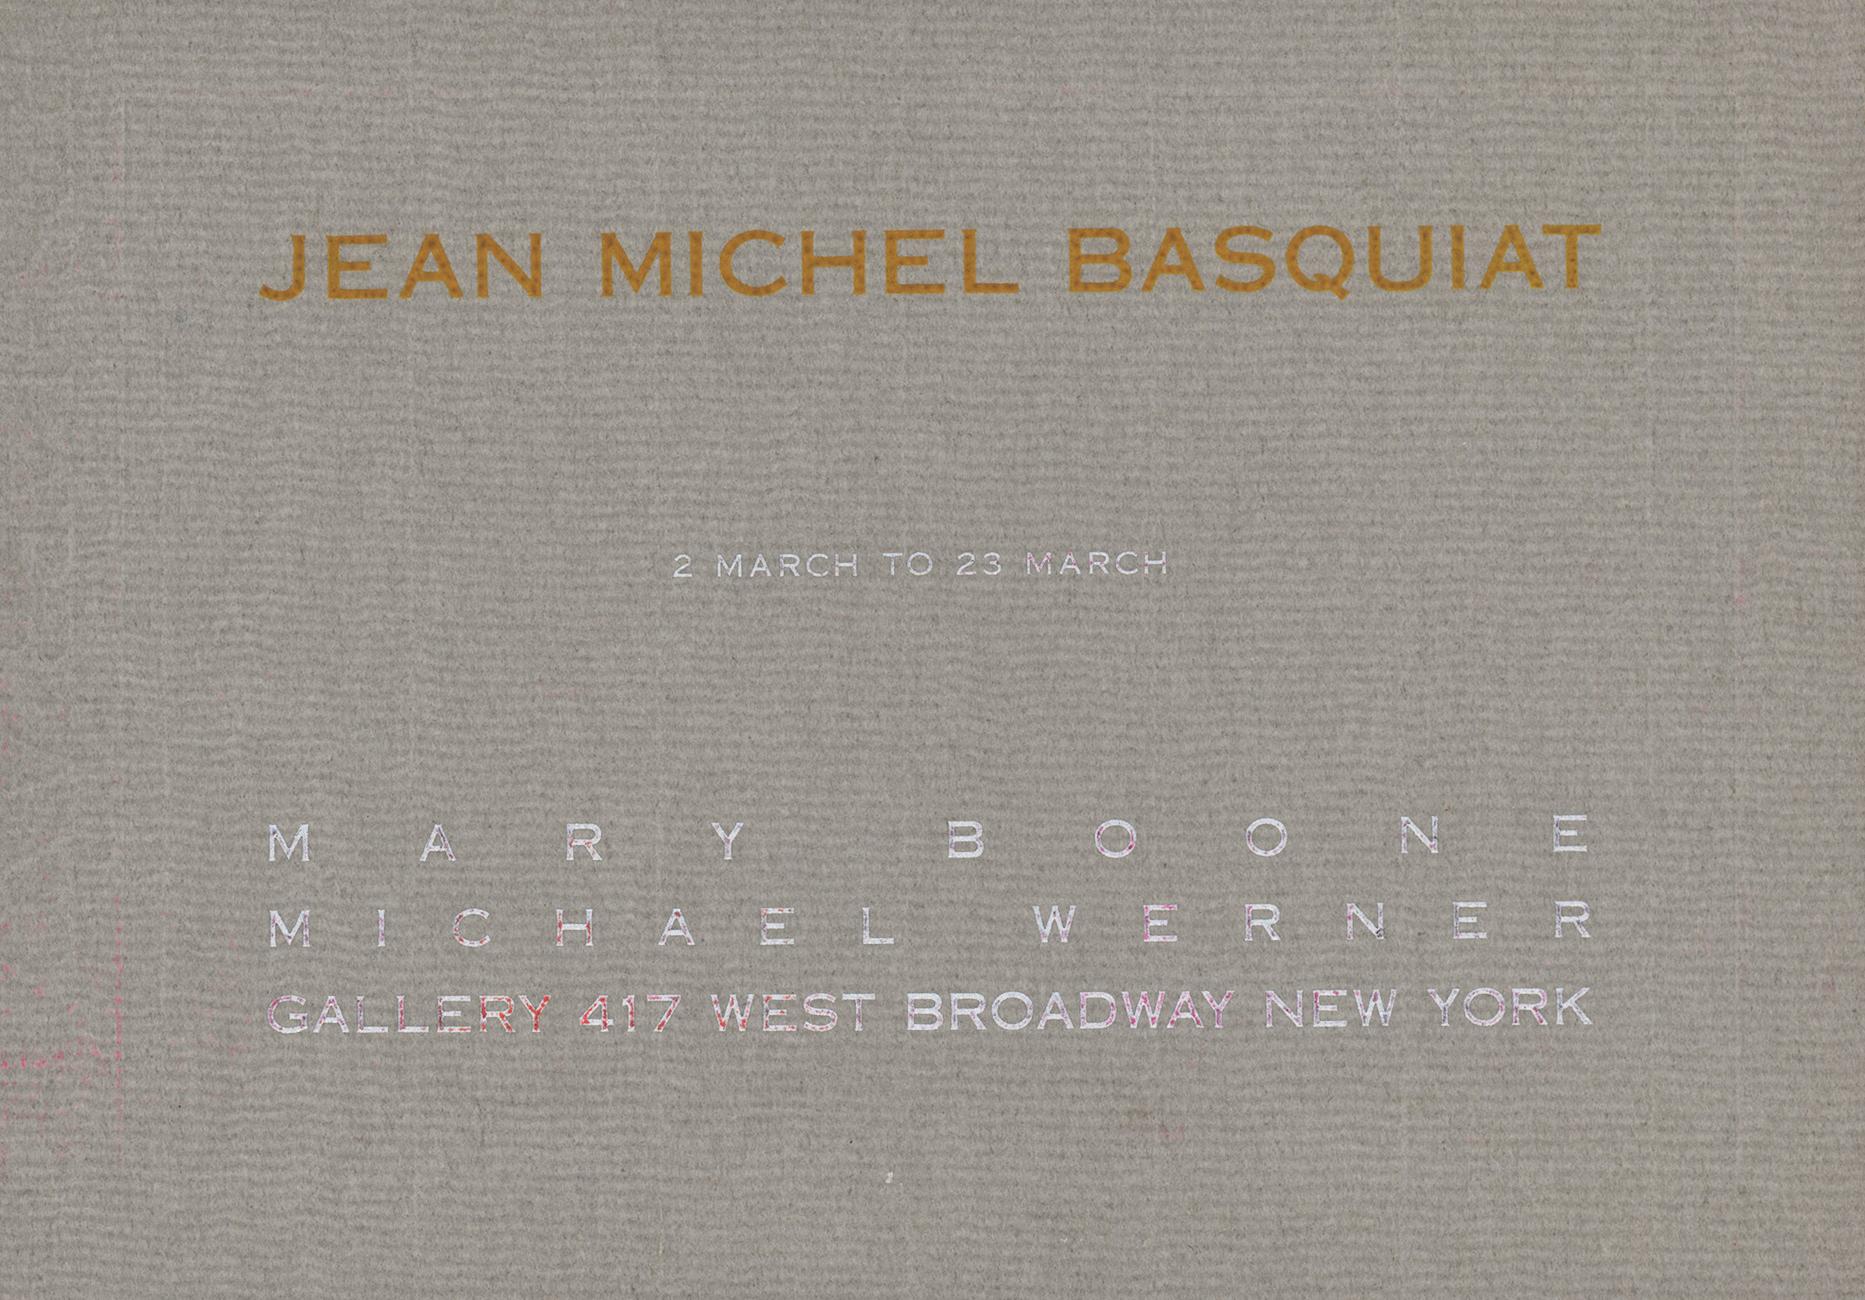 Basquiat Mary Boone Gallery 1985 (announcement) - Print by after Jean-Michel Basquiat